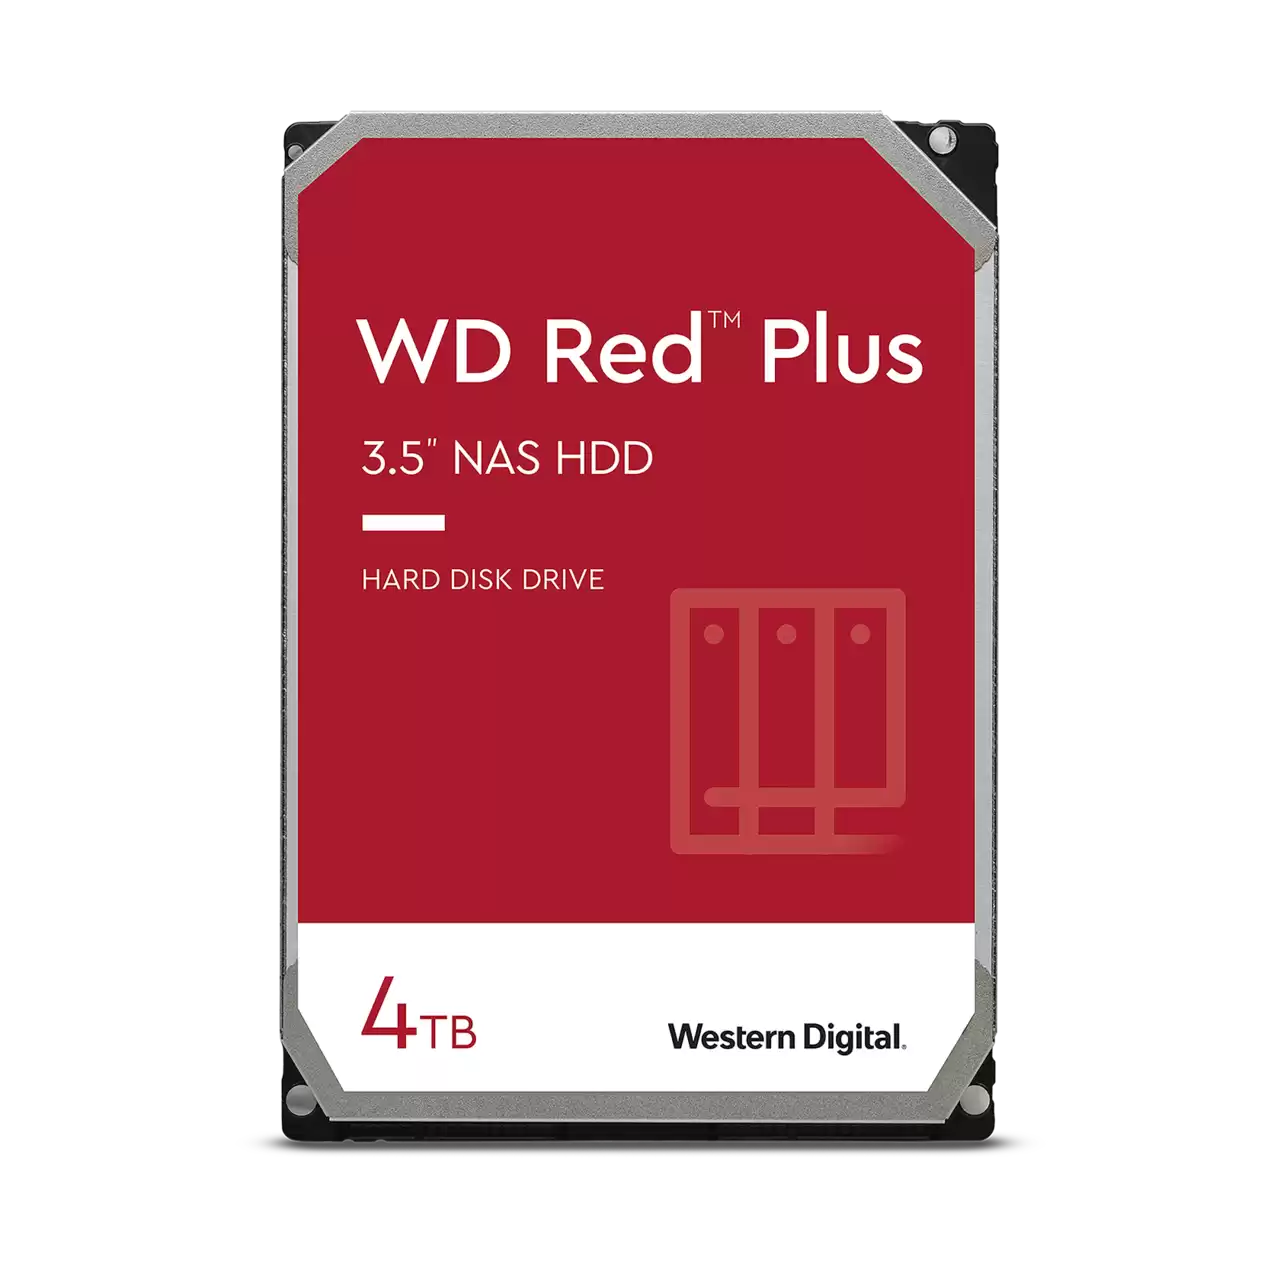 WD Red Plus NAS HDD 4TB 3.5